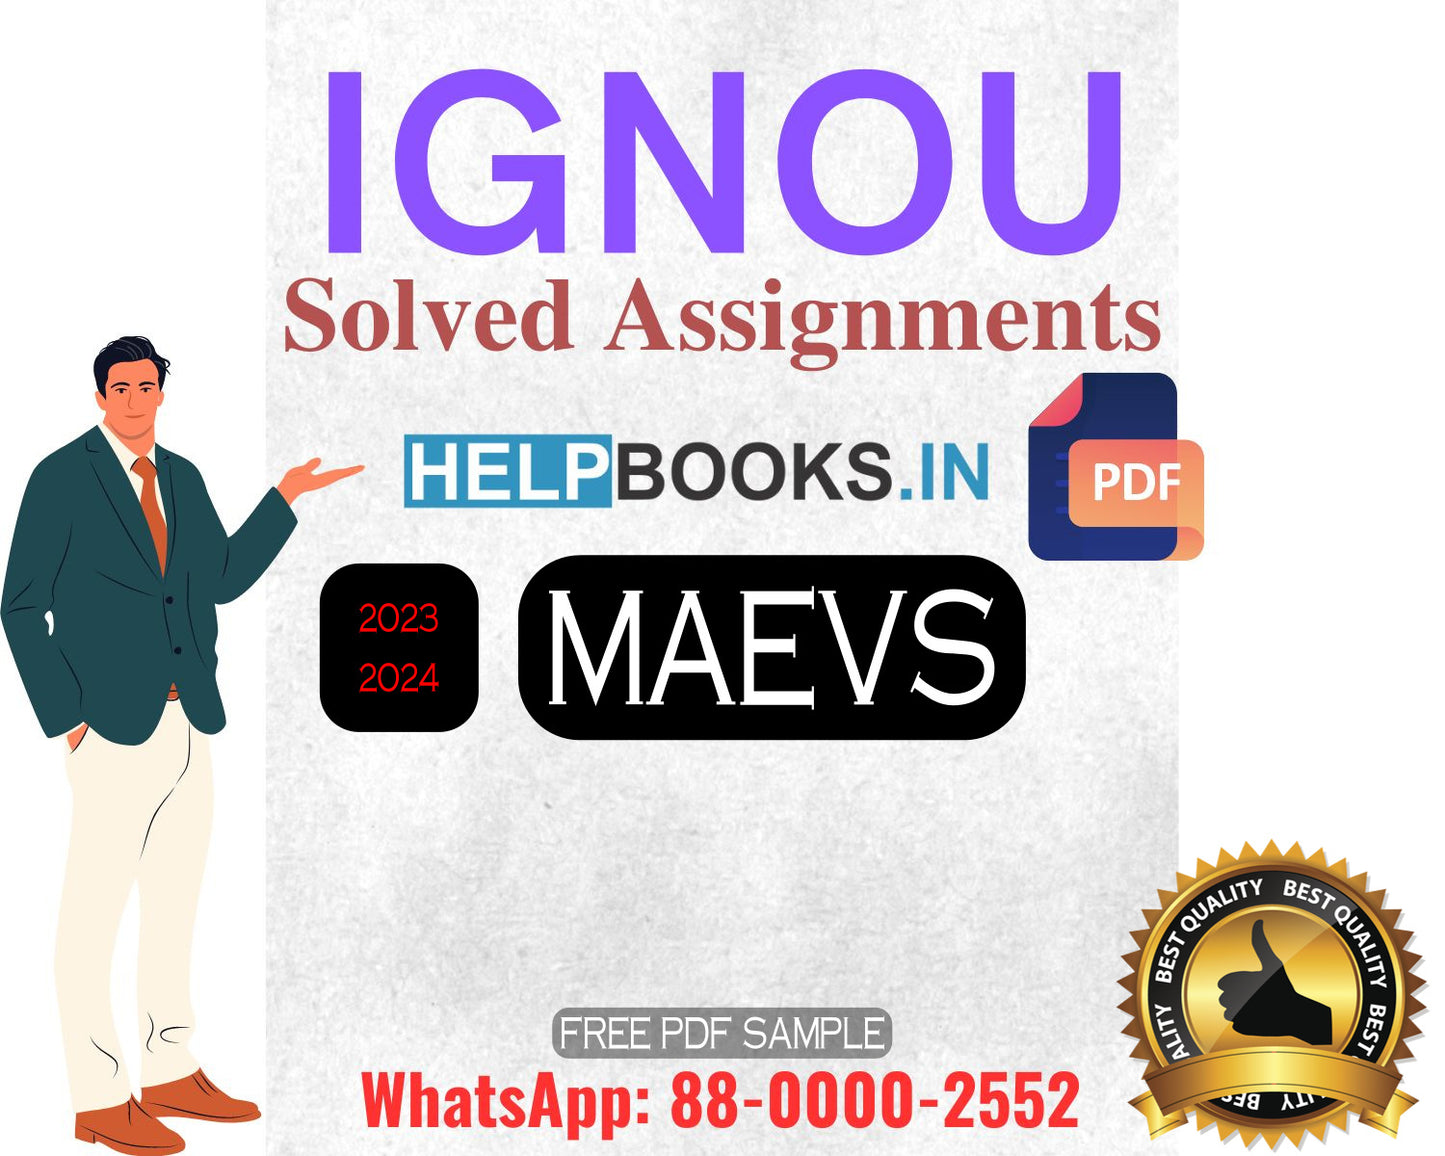 IGNOU Master's Degree Programme Latest IGNOU Solved Assignment 2023-24 : MAEVS Master of Arts Environmental Studies Solved Assignments